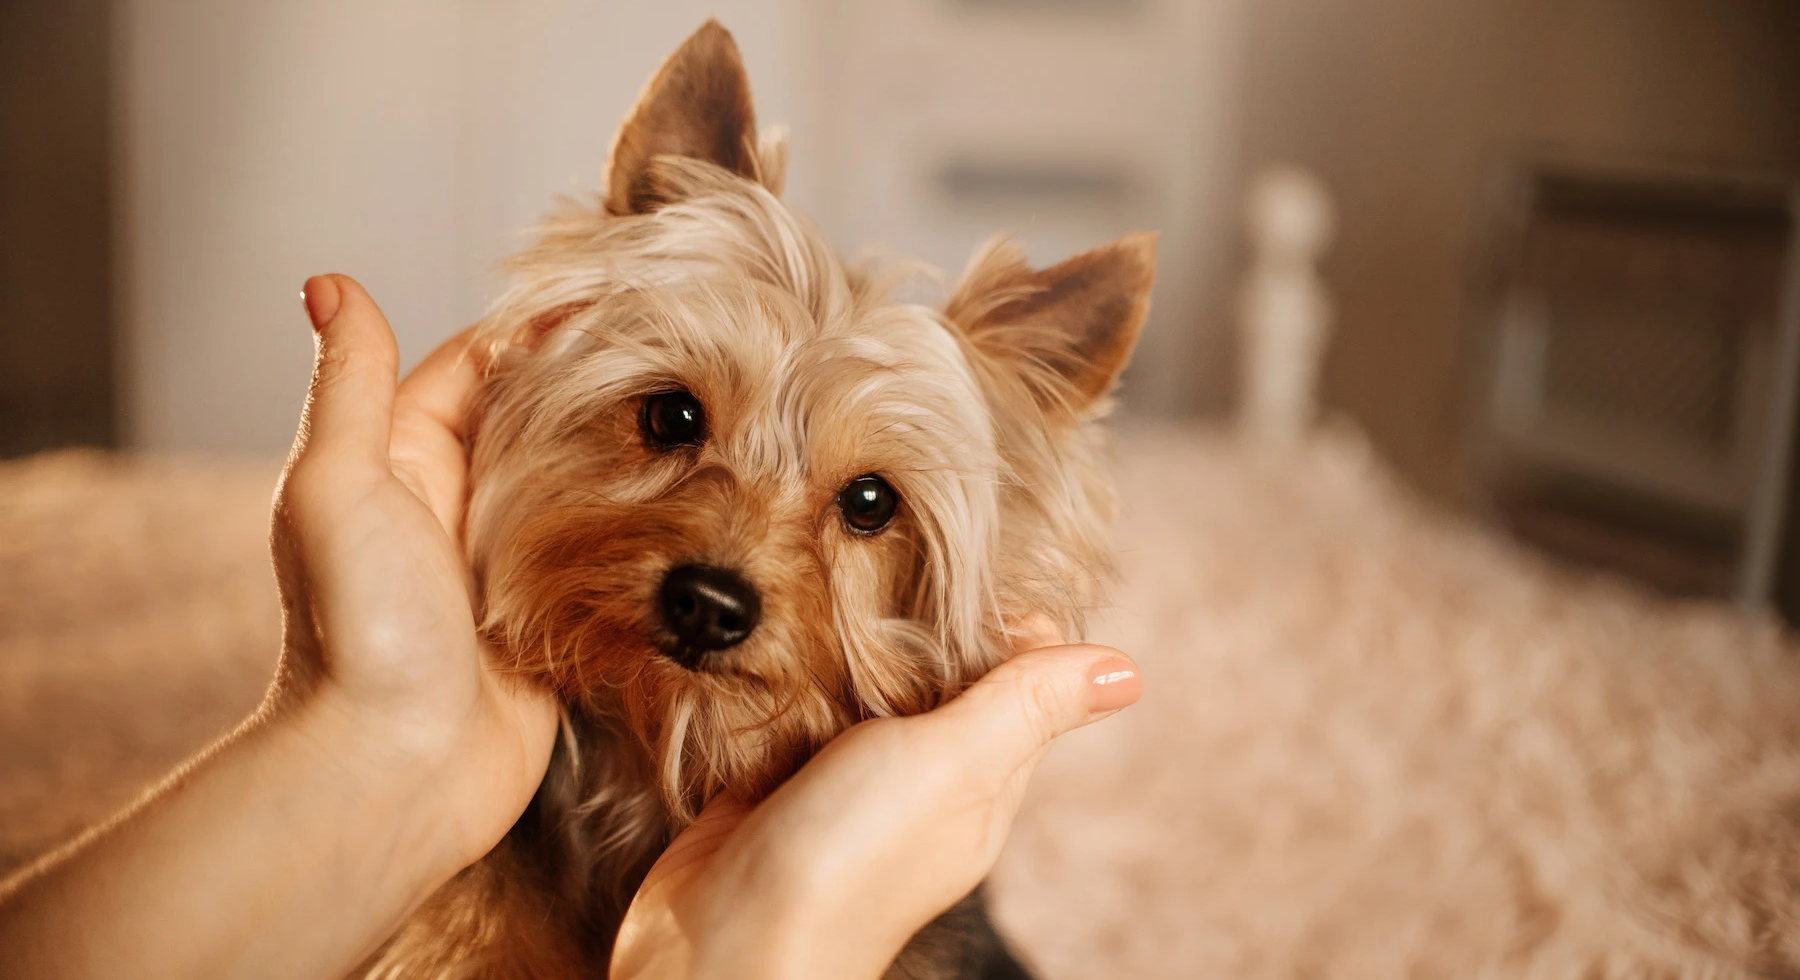 A photo of a person lovingly holding a Yorkie's face in their hands.